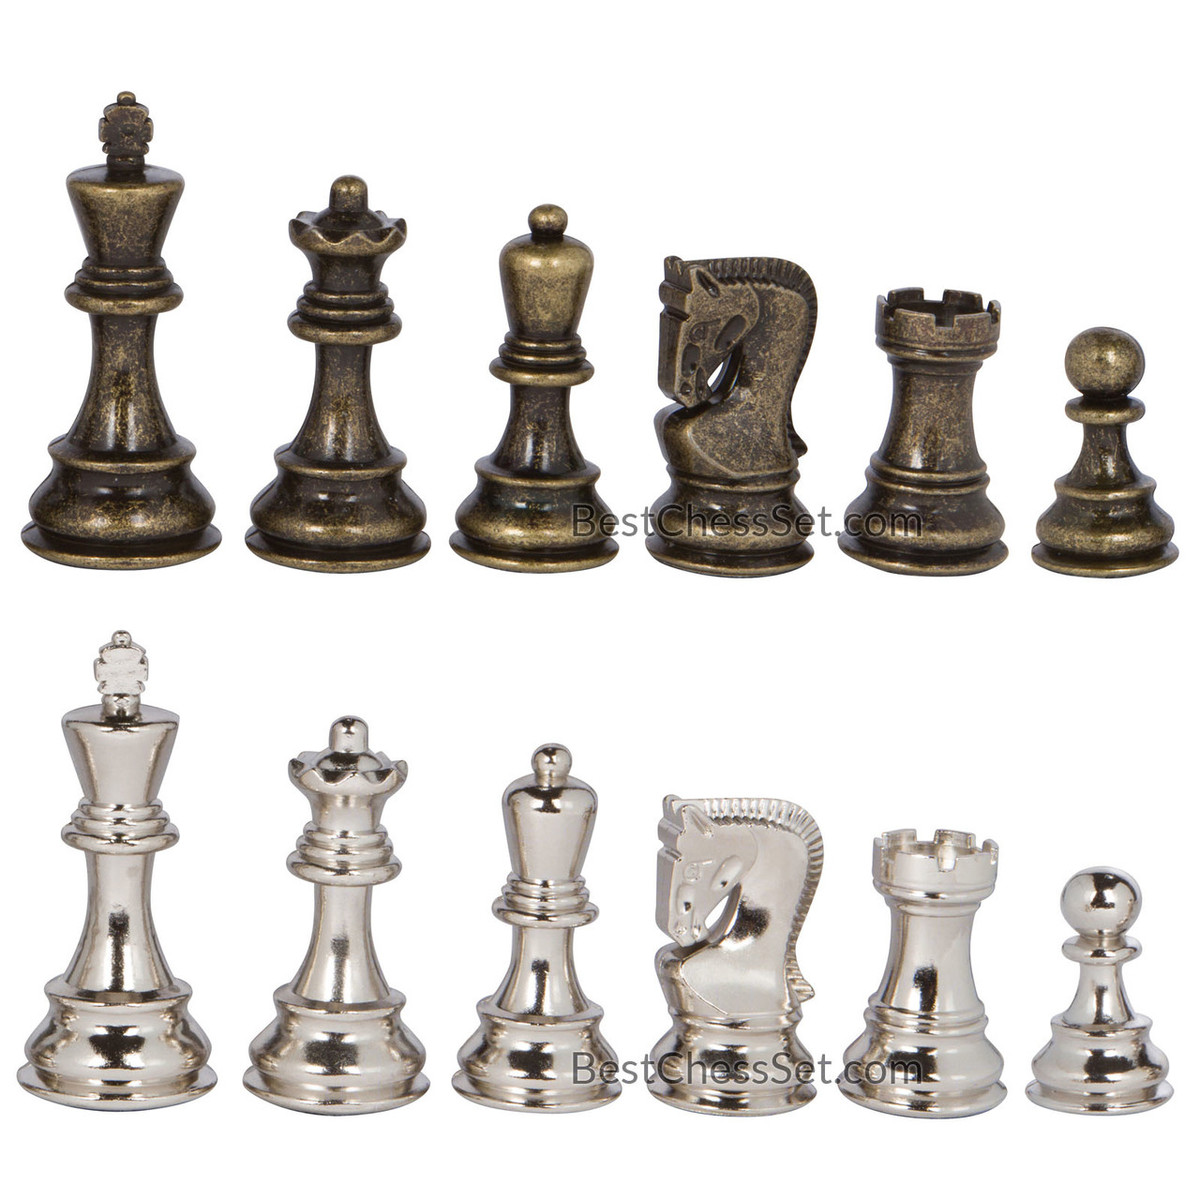 The Royal Carved Series brass chess set 3.75 King with 14 x 14